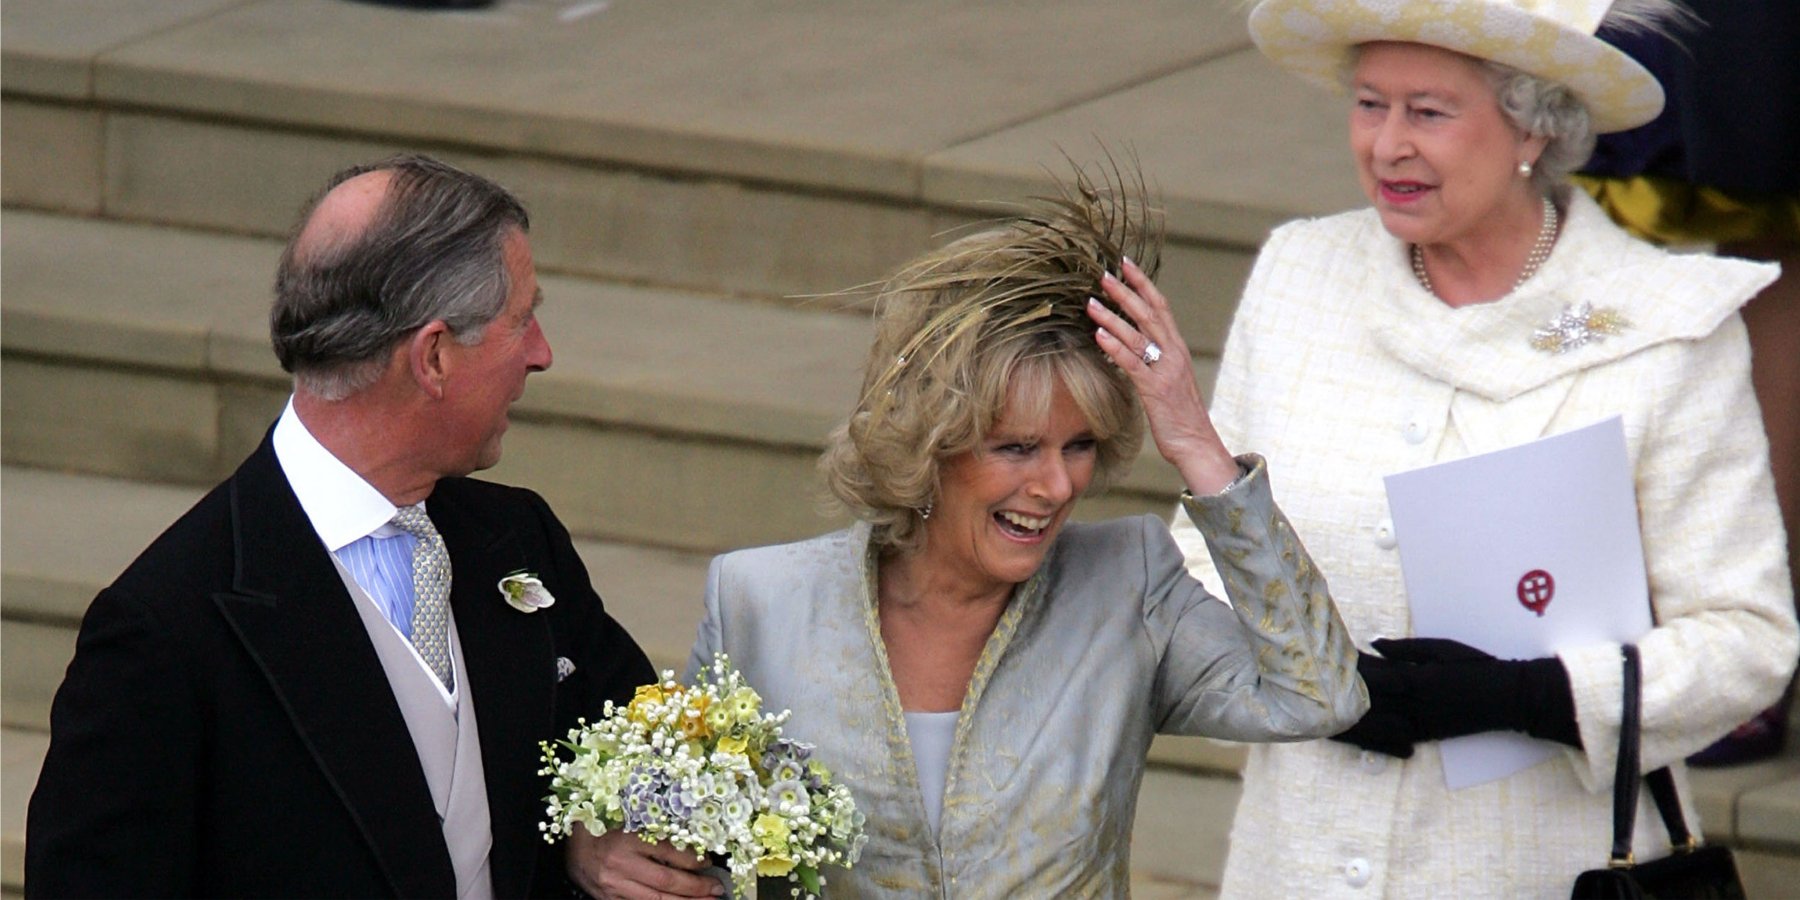 Camilla Parker Bowles Said it Must Have Been 'Difficult' for Queen ...